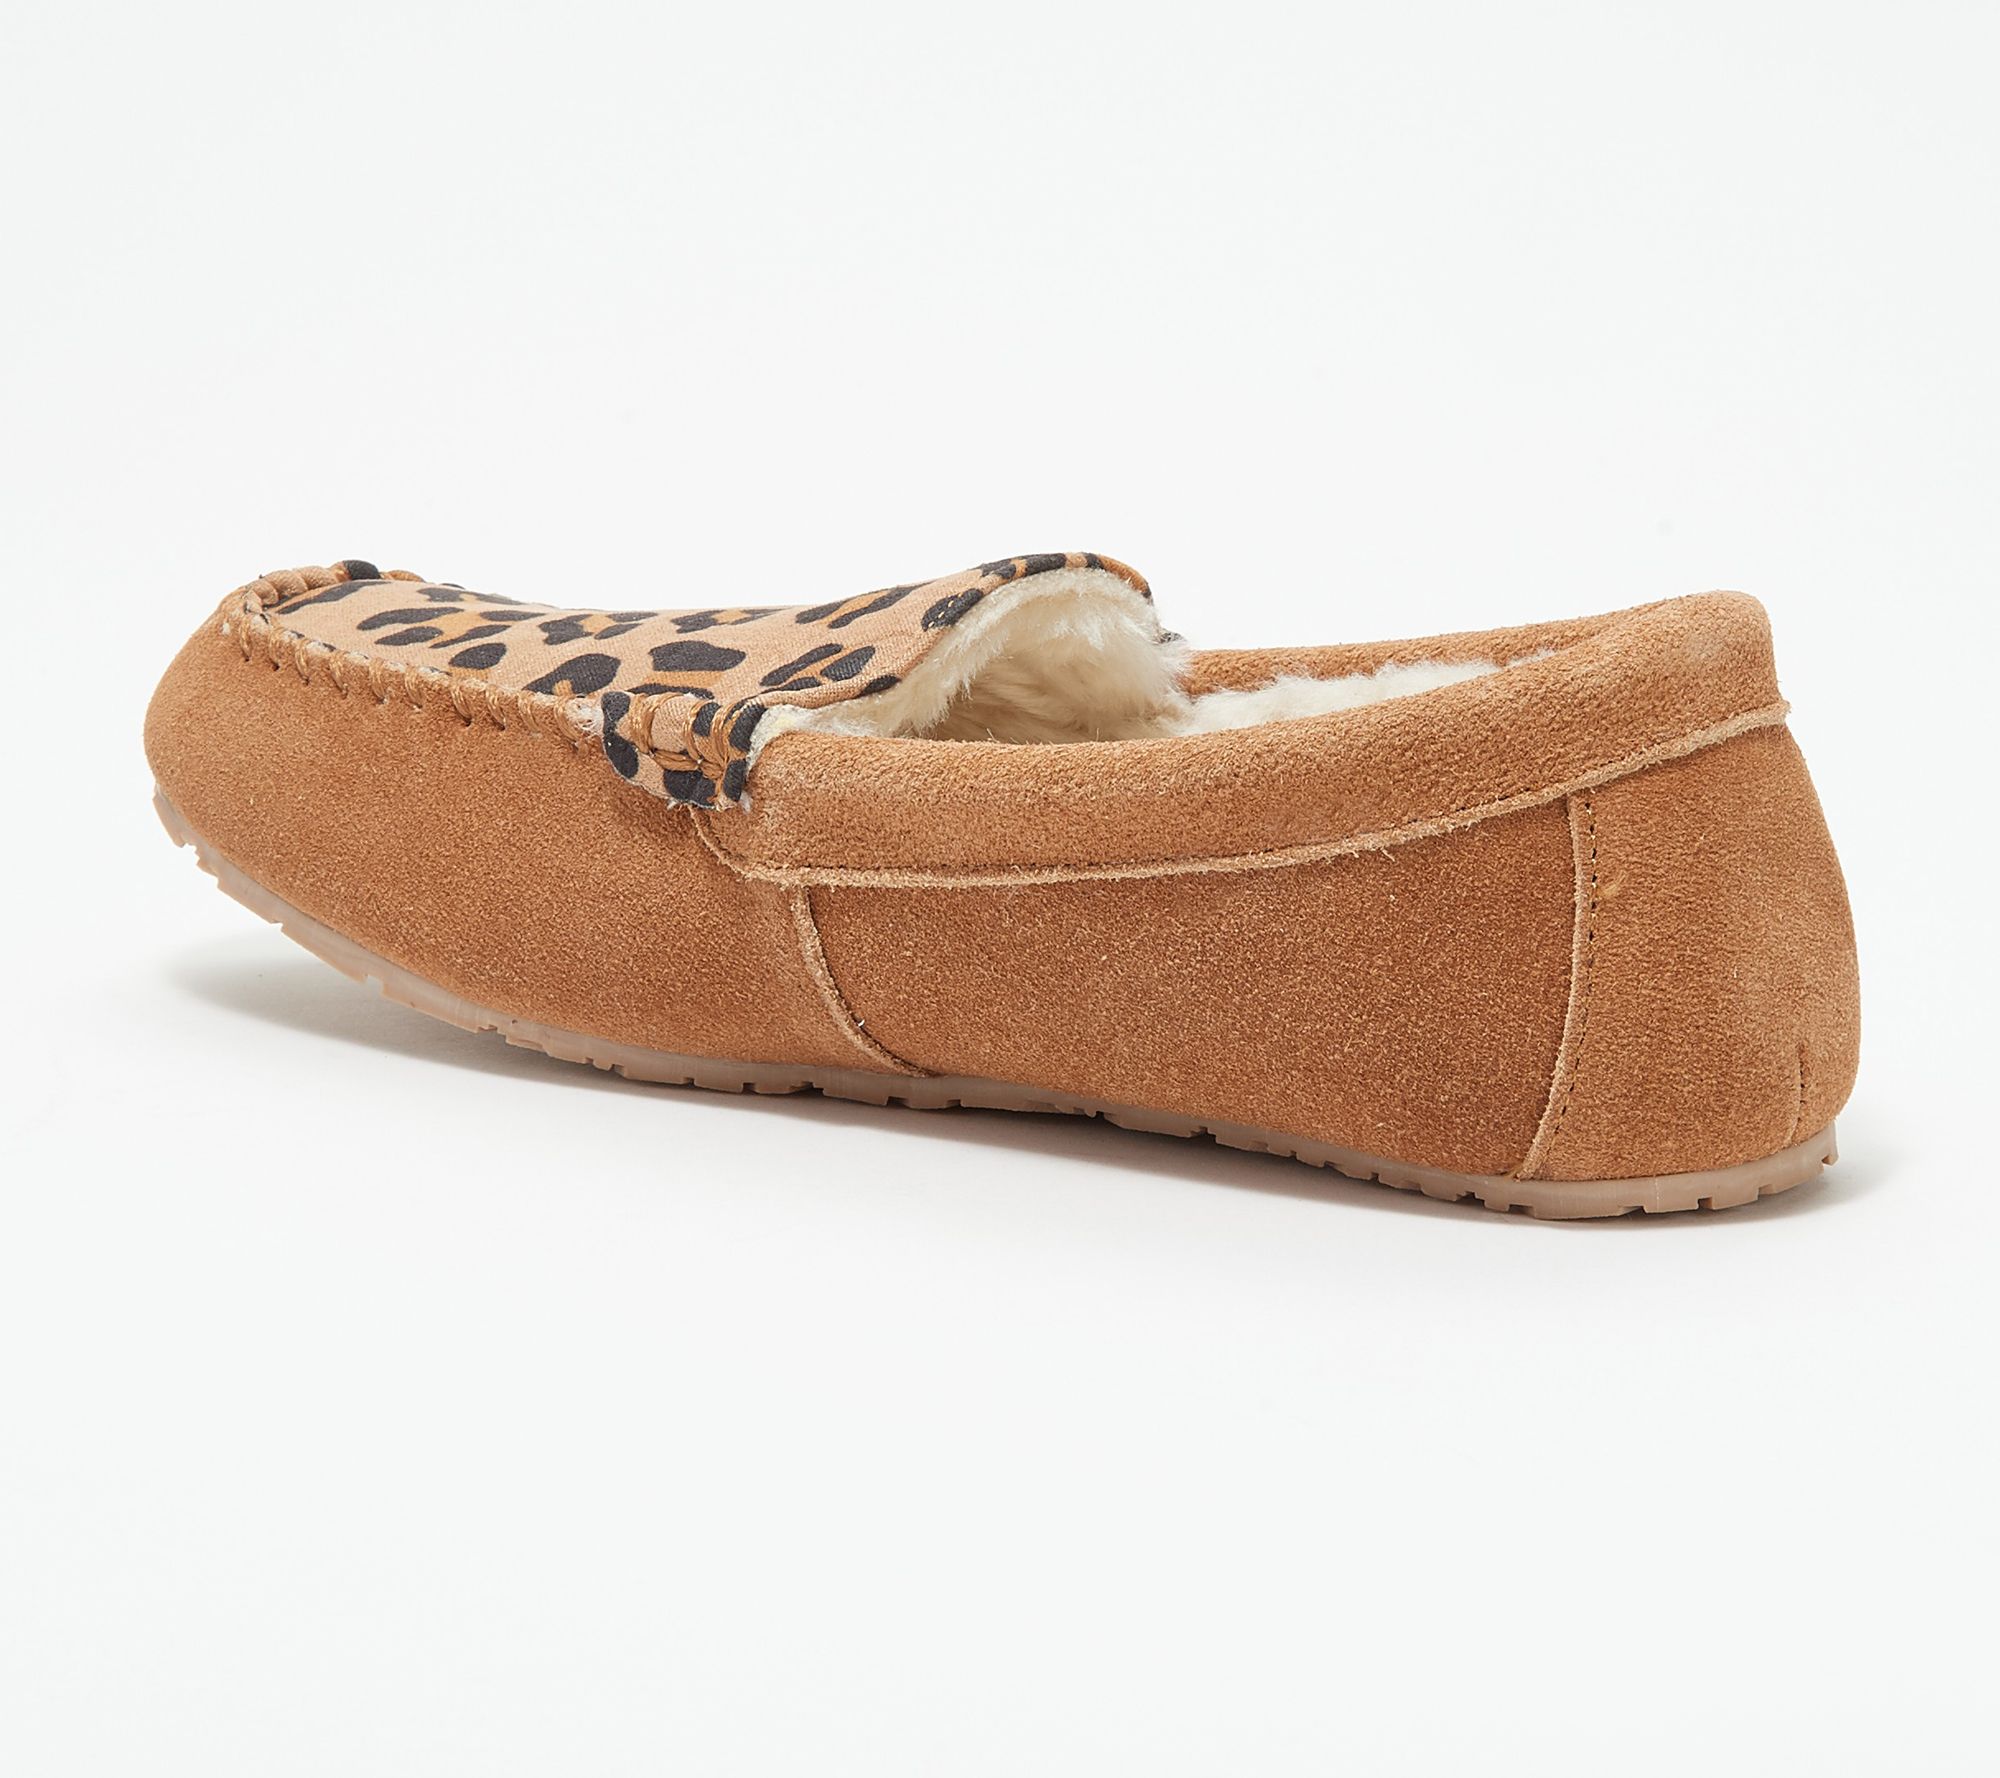 WARM GLAMOUR LADIES CLARKS SUEDE LEATHER FUR LINED INDOOR MOCCASIN BOAT SLIPPERS 